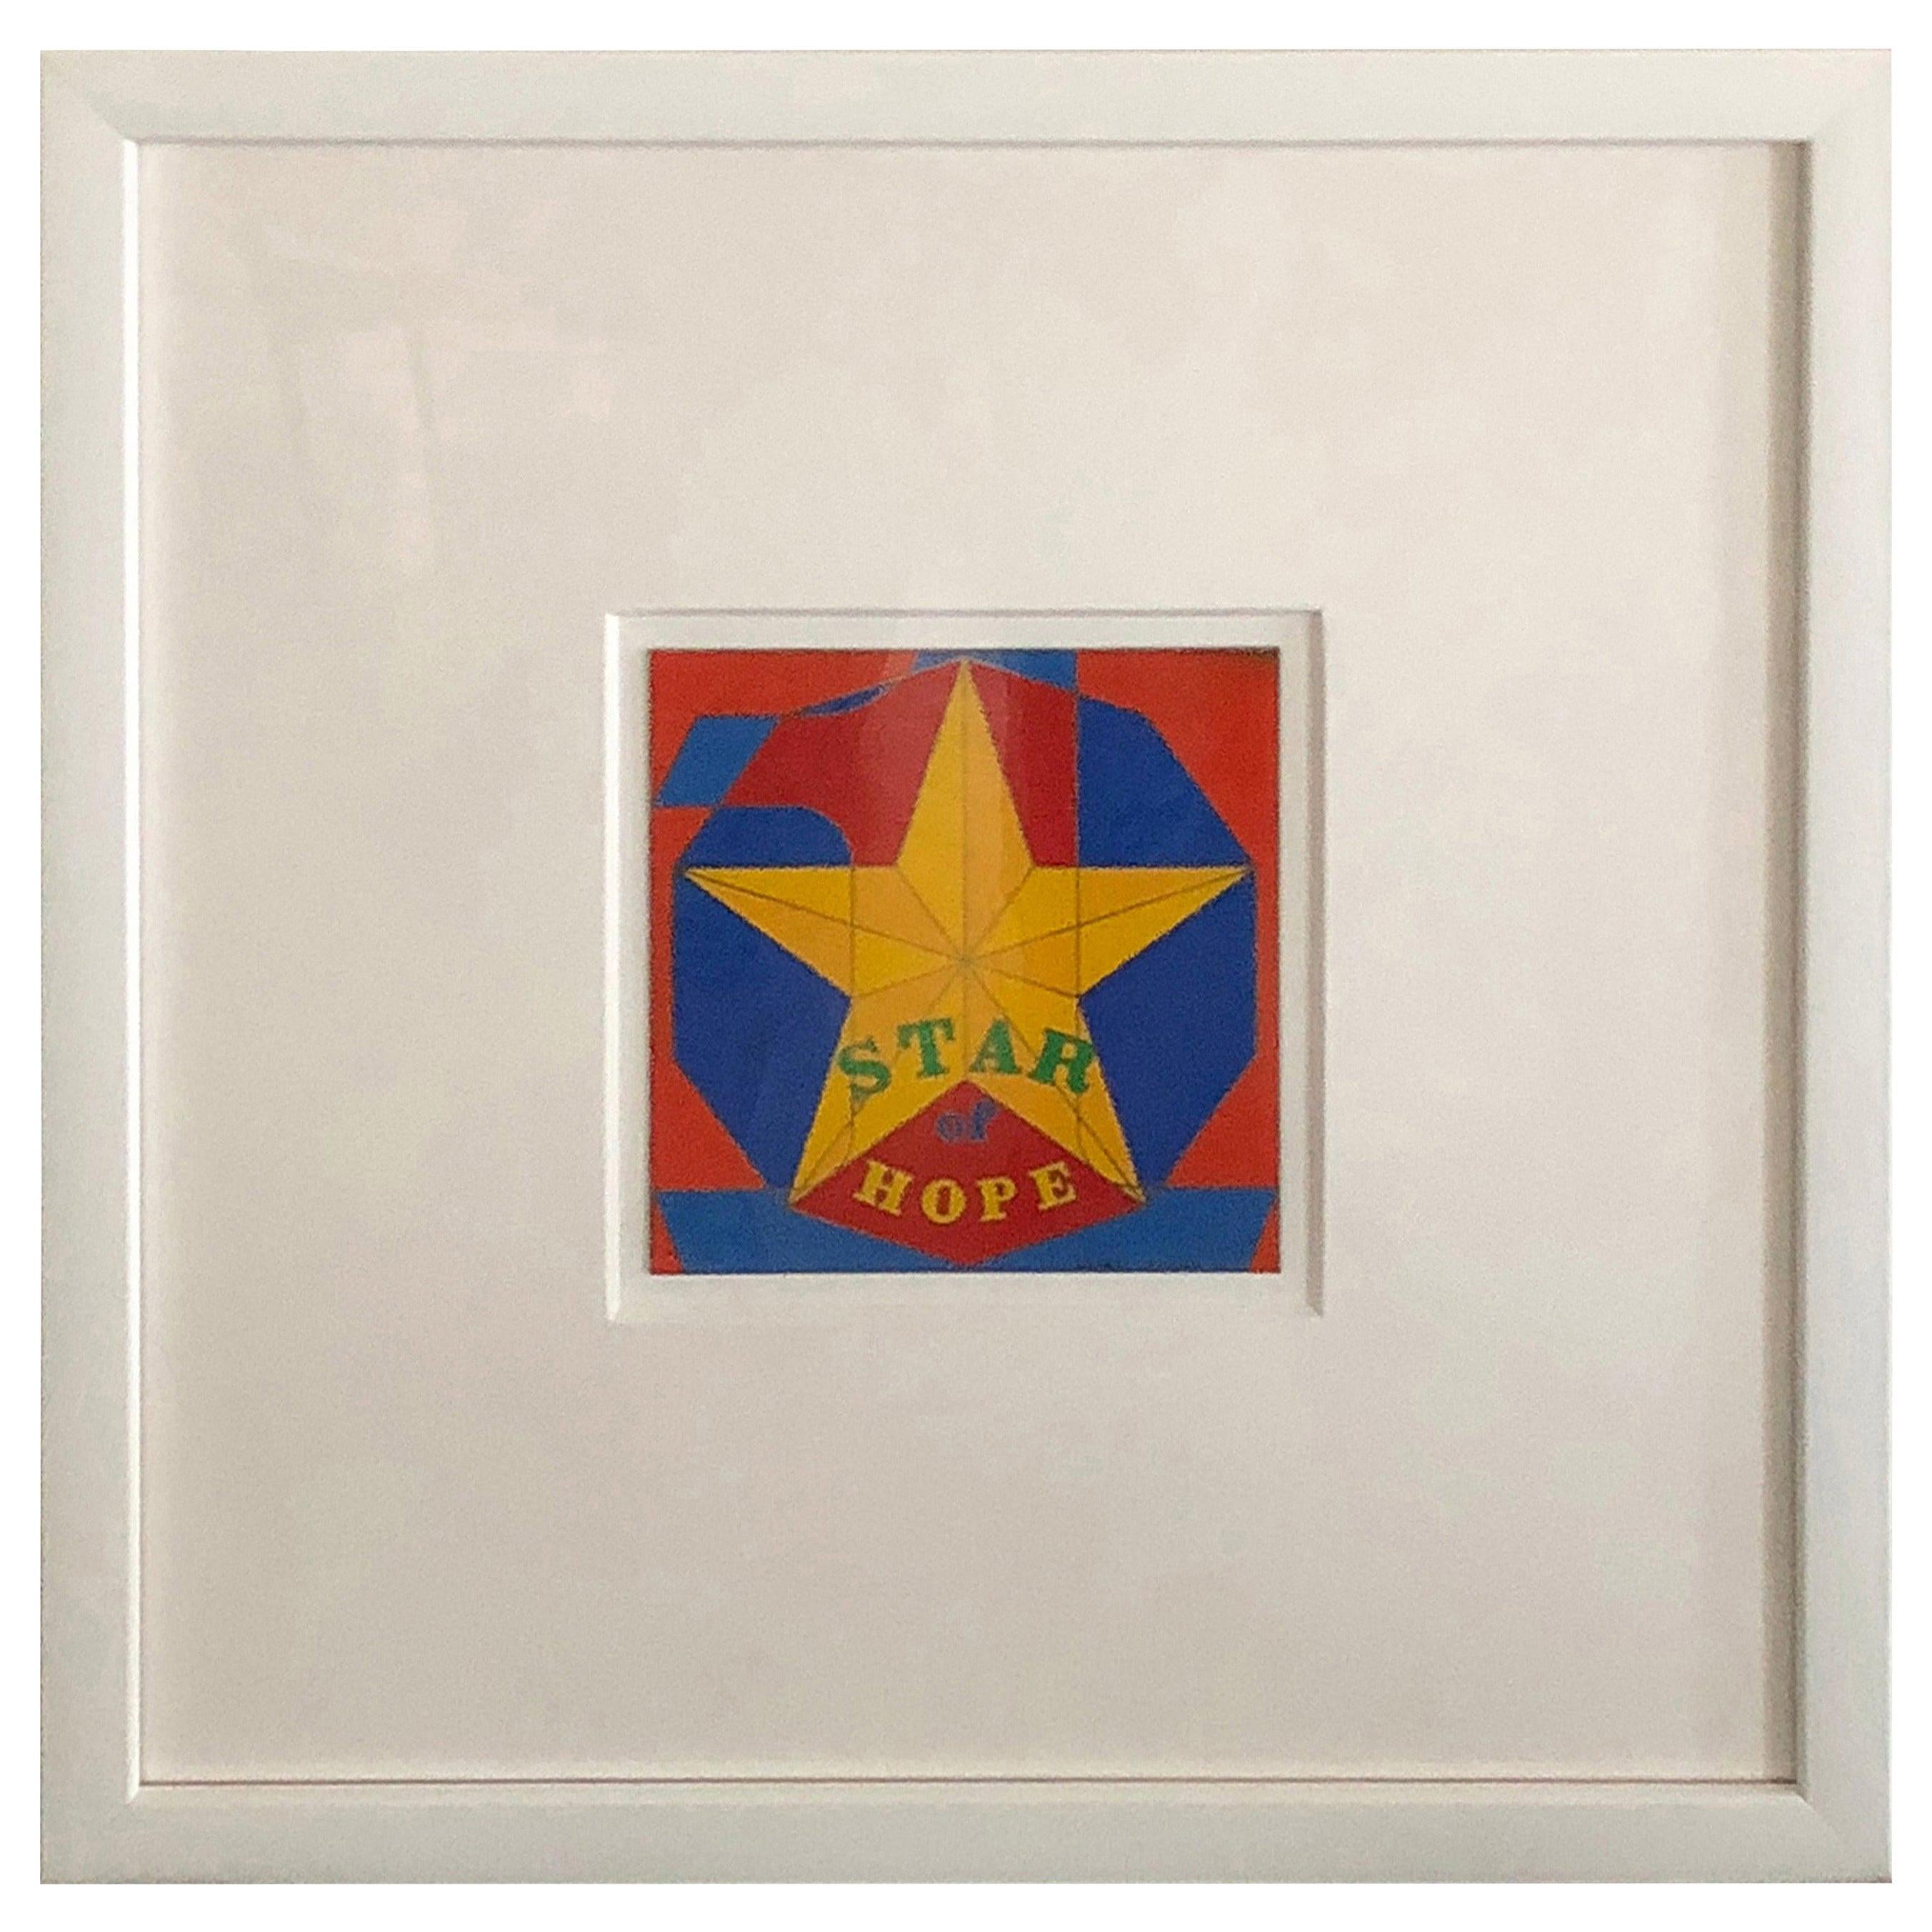 Robert Indiana Enamel on Metal, Star of Hope, 1972 in Red, Blue, Yellow & Green